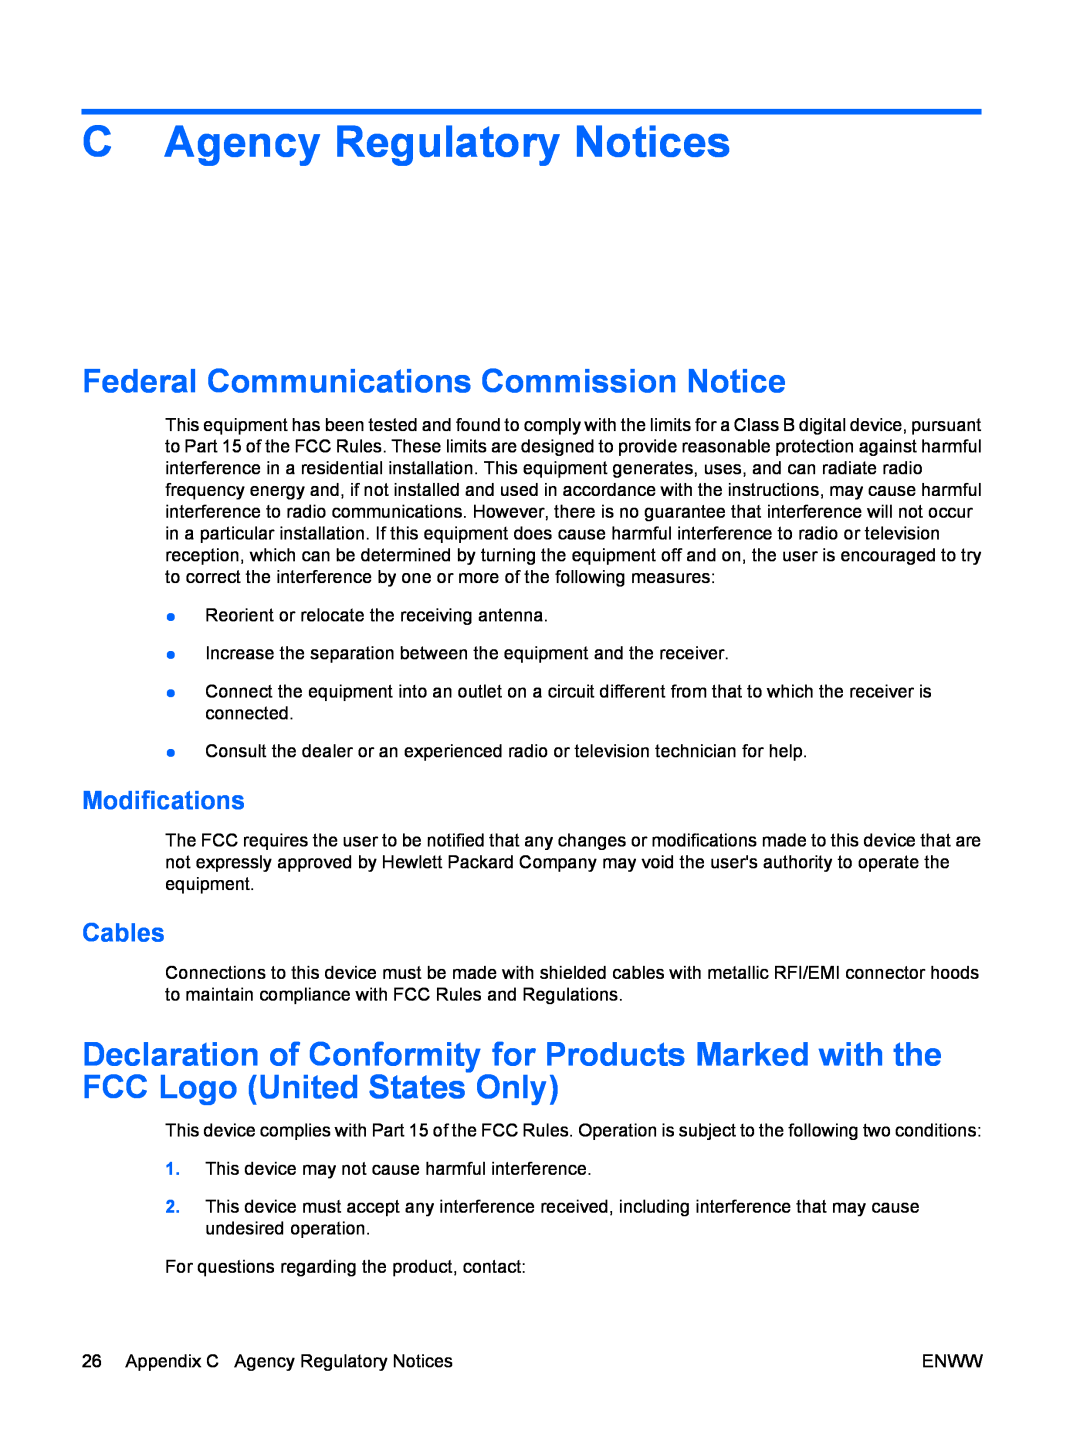 HP CQ1859s, CQ1859E manual C Agency Regulatory Notices, Federal Communications Commission Notice, Modifications, Cables 